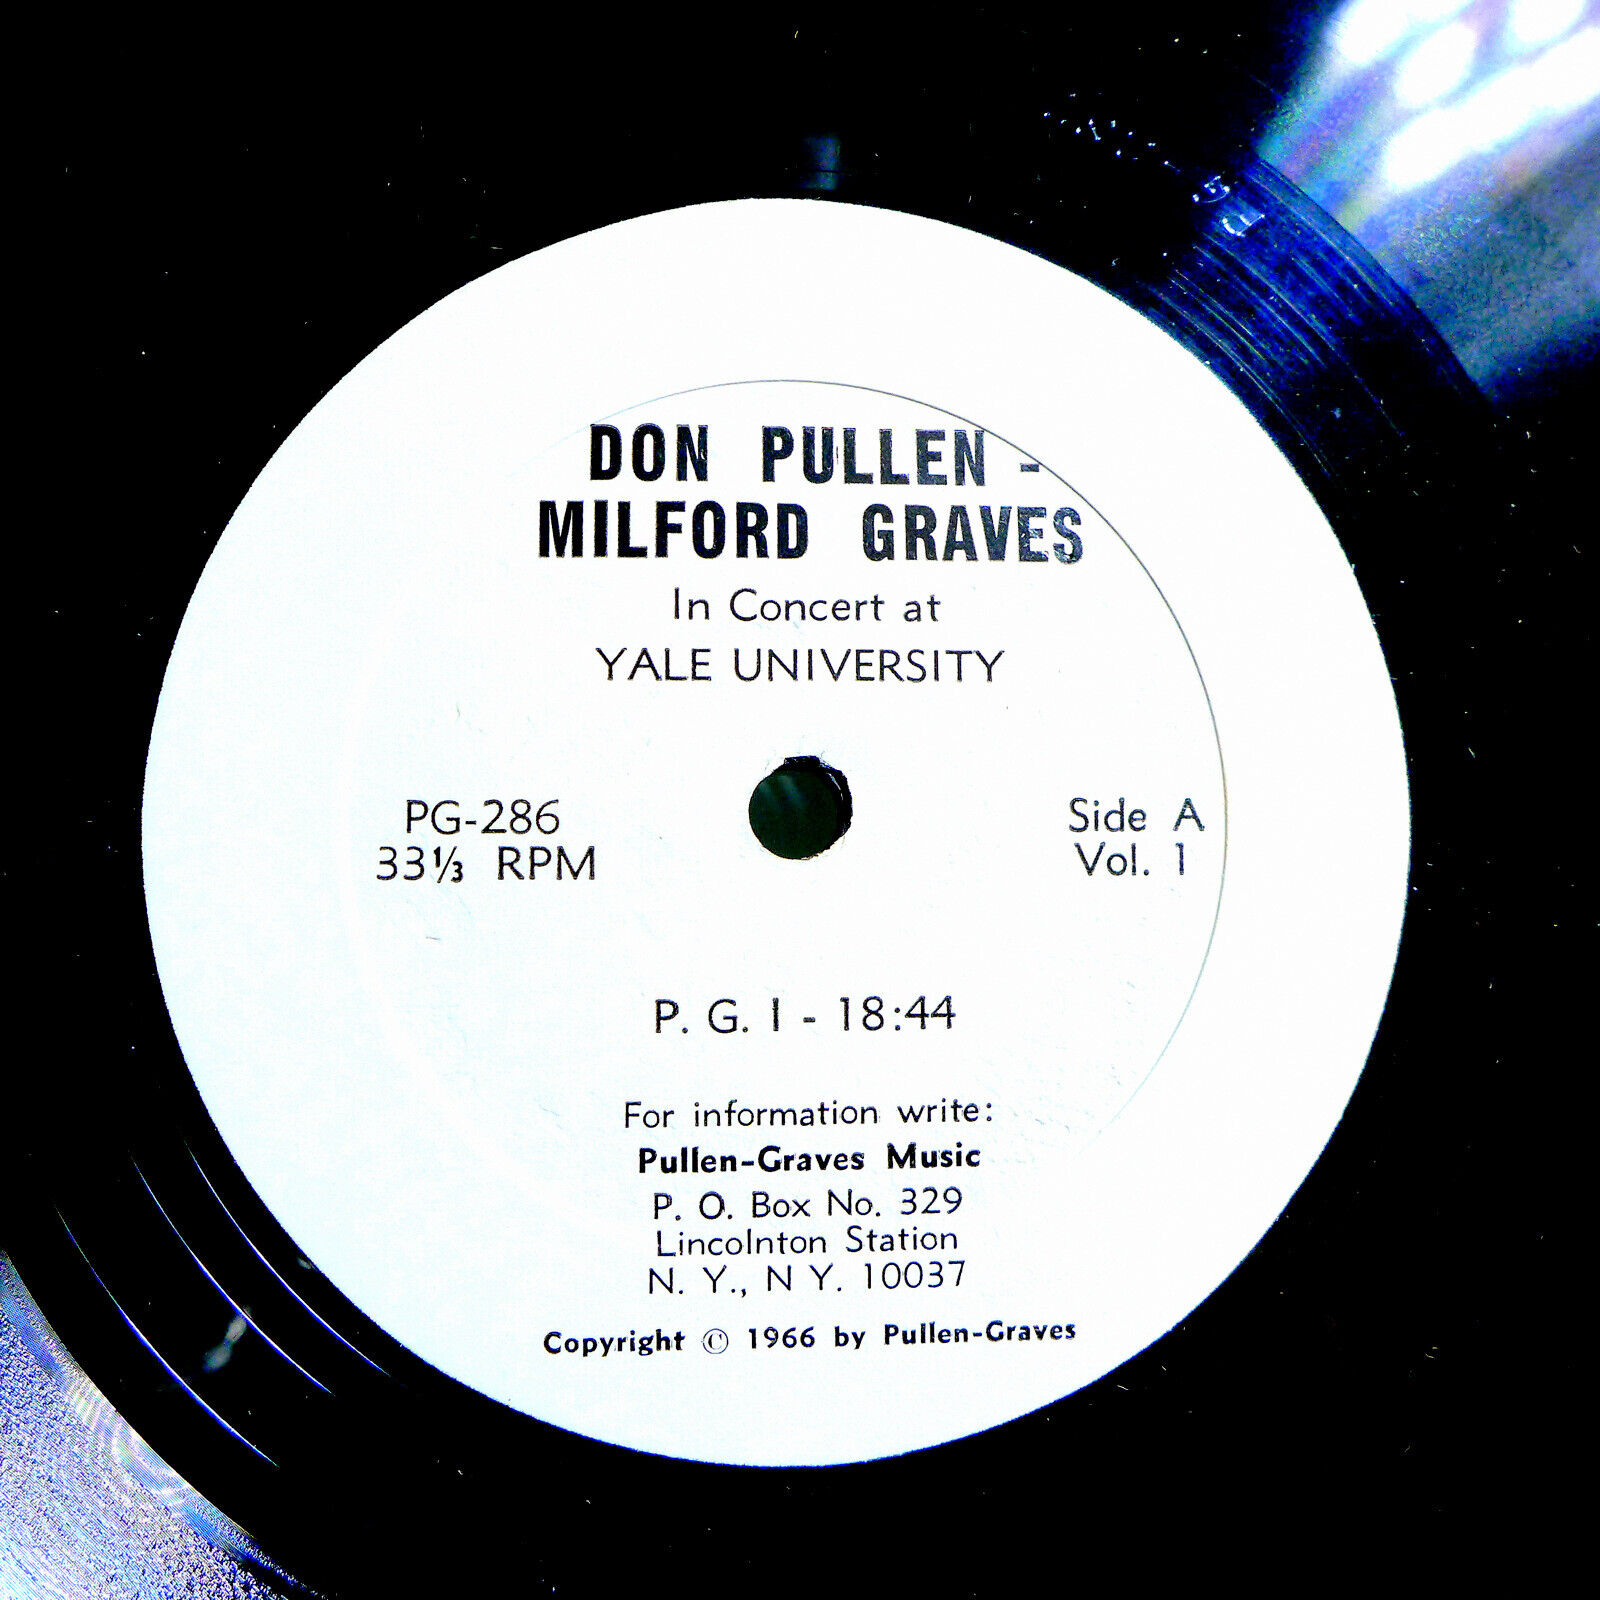 Pic 3 DON PULLEN/MILFORD GRAVES YALE CONCERT INSANELY RARE ORIG LP HAND PAINTED COVER